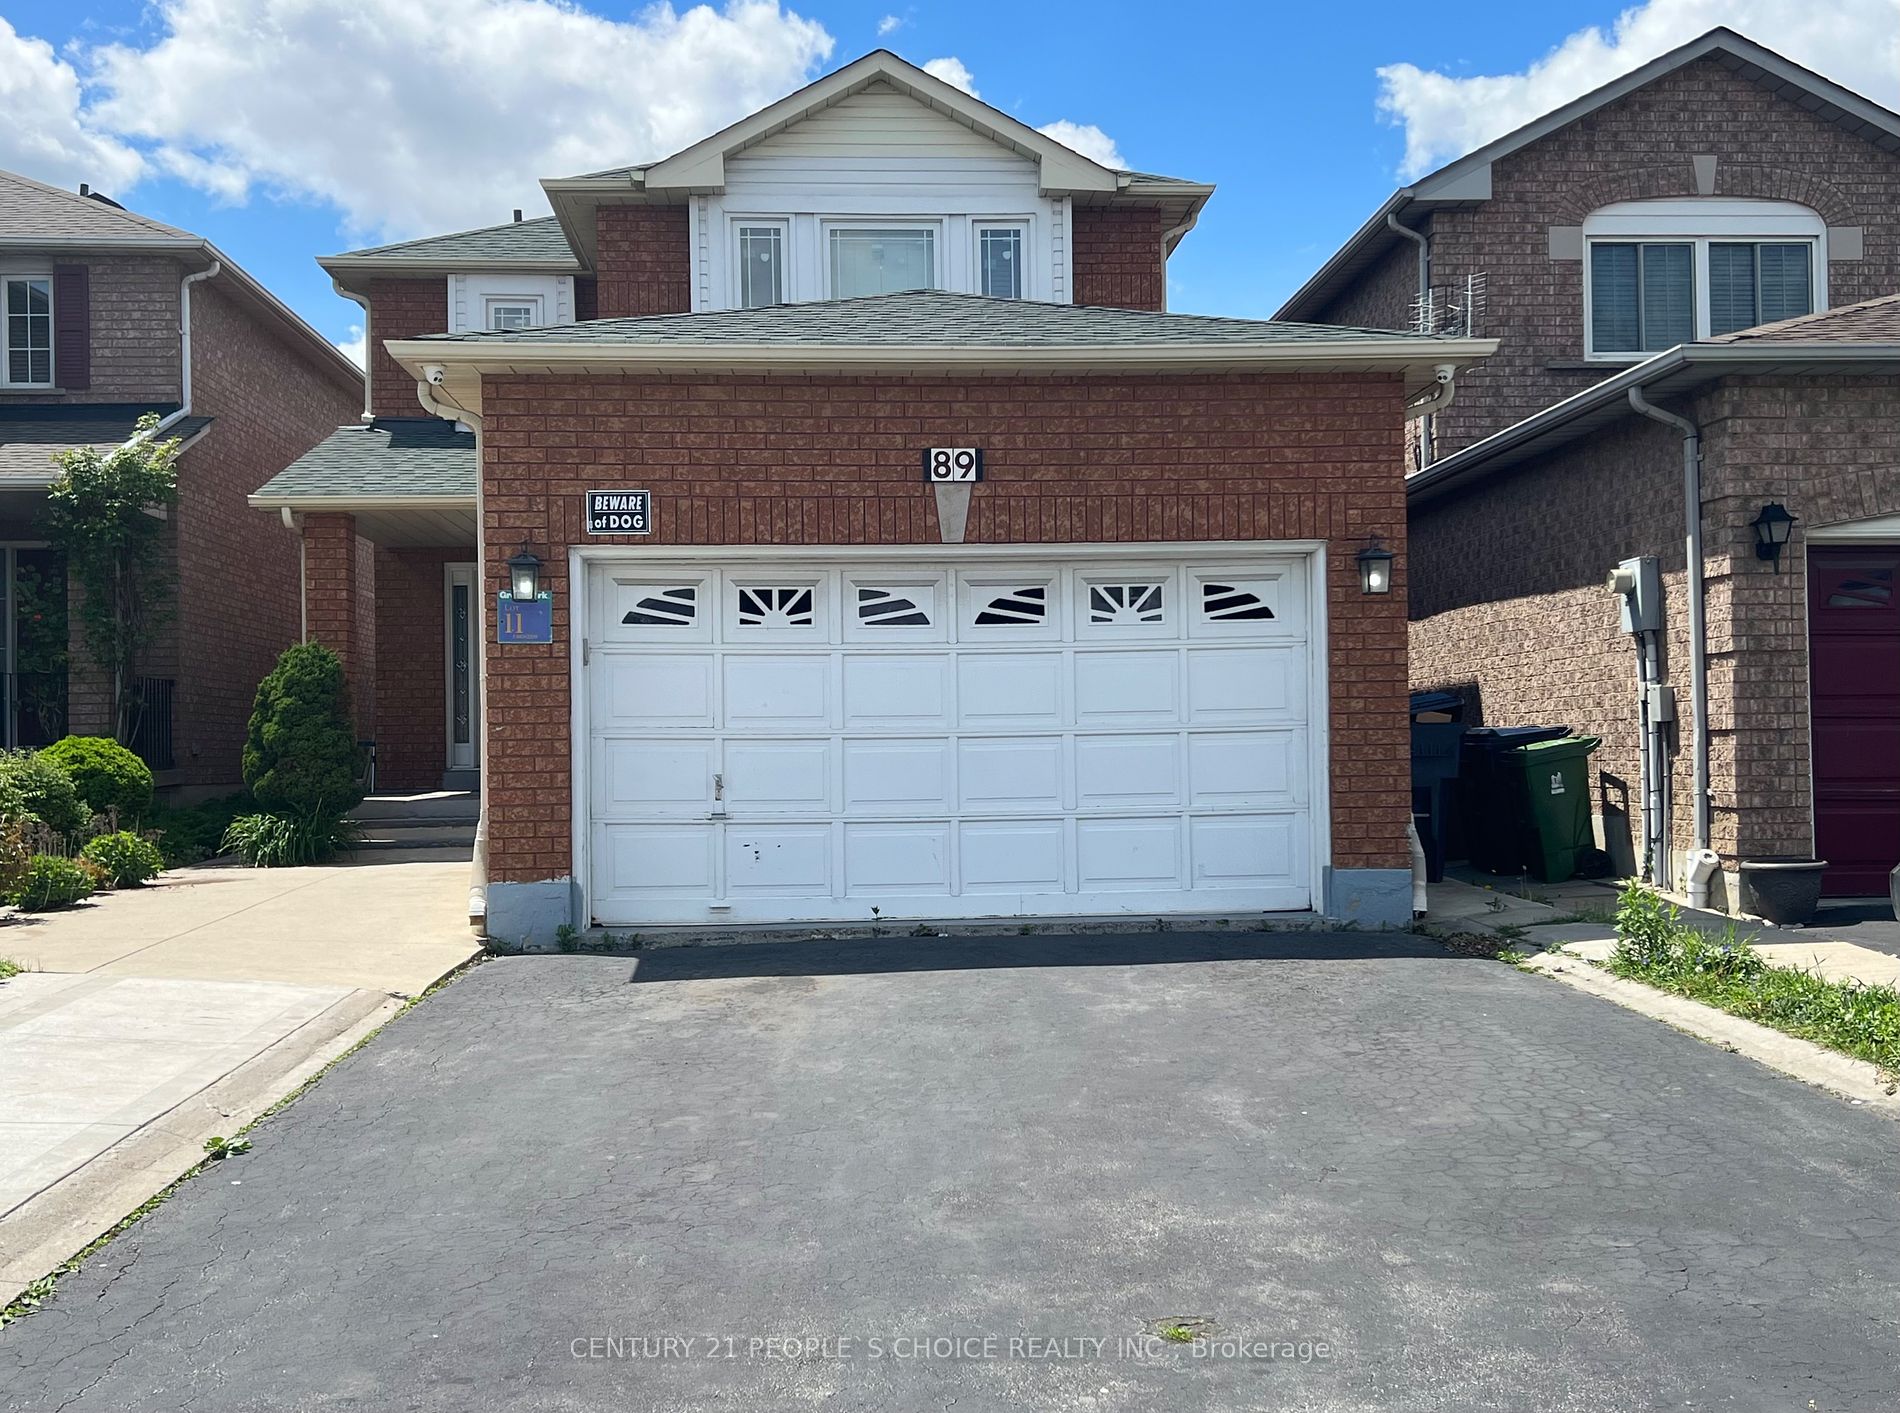 Detached house for sale at 89 Upper Humber Dr Toronto Ontario